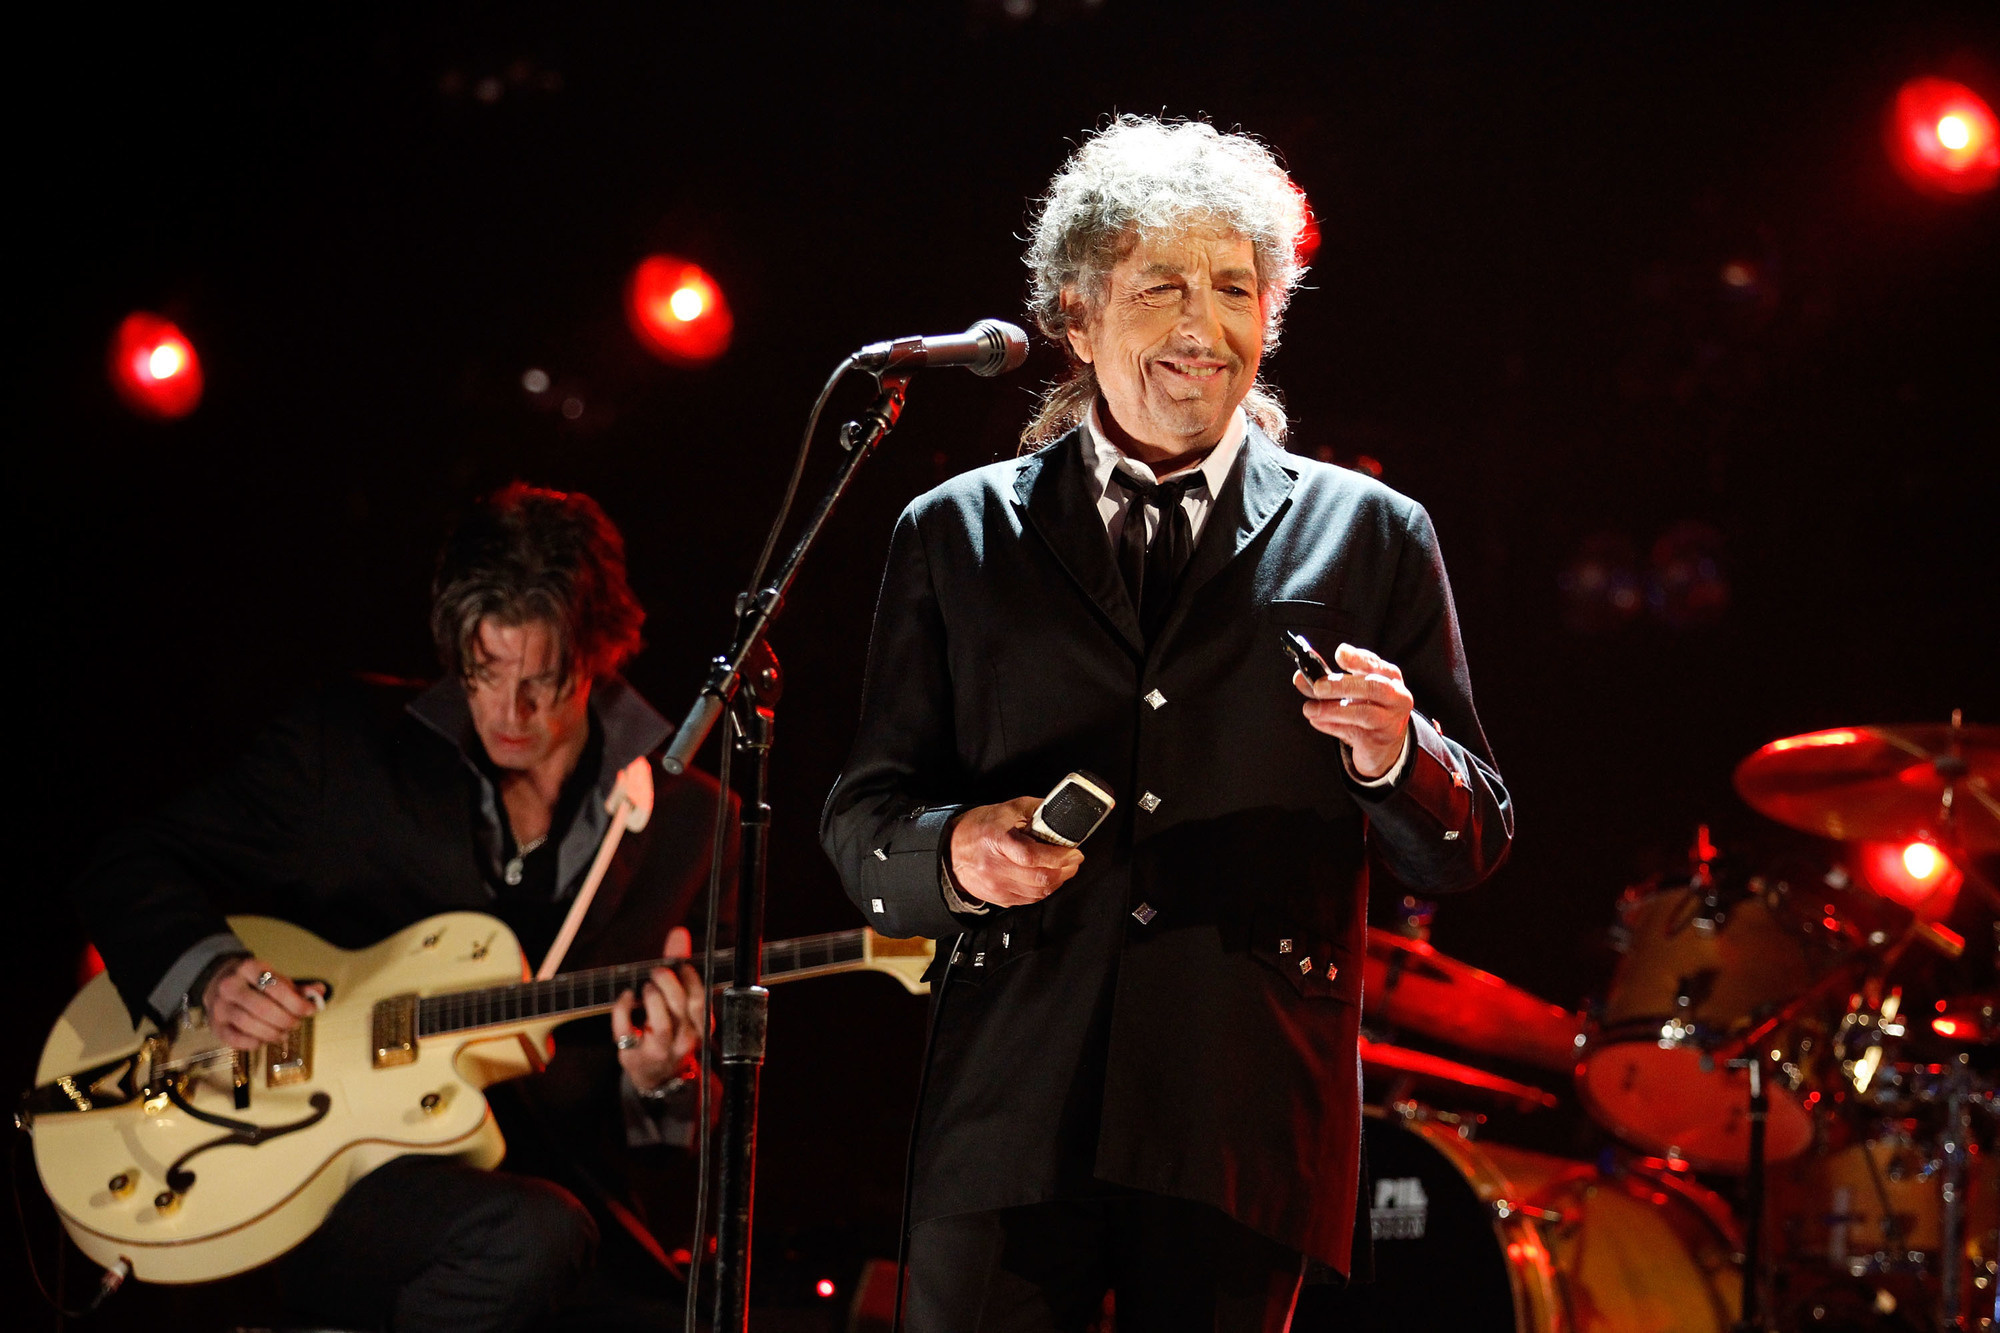 Bob Dylan's tour may not have been never ending but it sure felt that way.
The musician began touring in 1988, and continued to do nearly 100 shows per year over a period of 28 years. It's believed that his "Never Ending Tour" had over 2,700 shows worldwide.